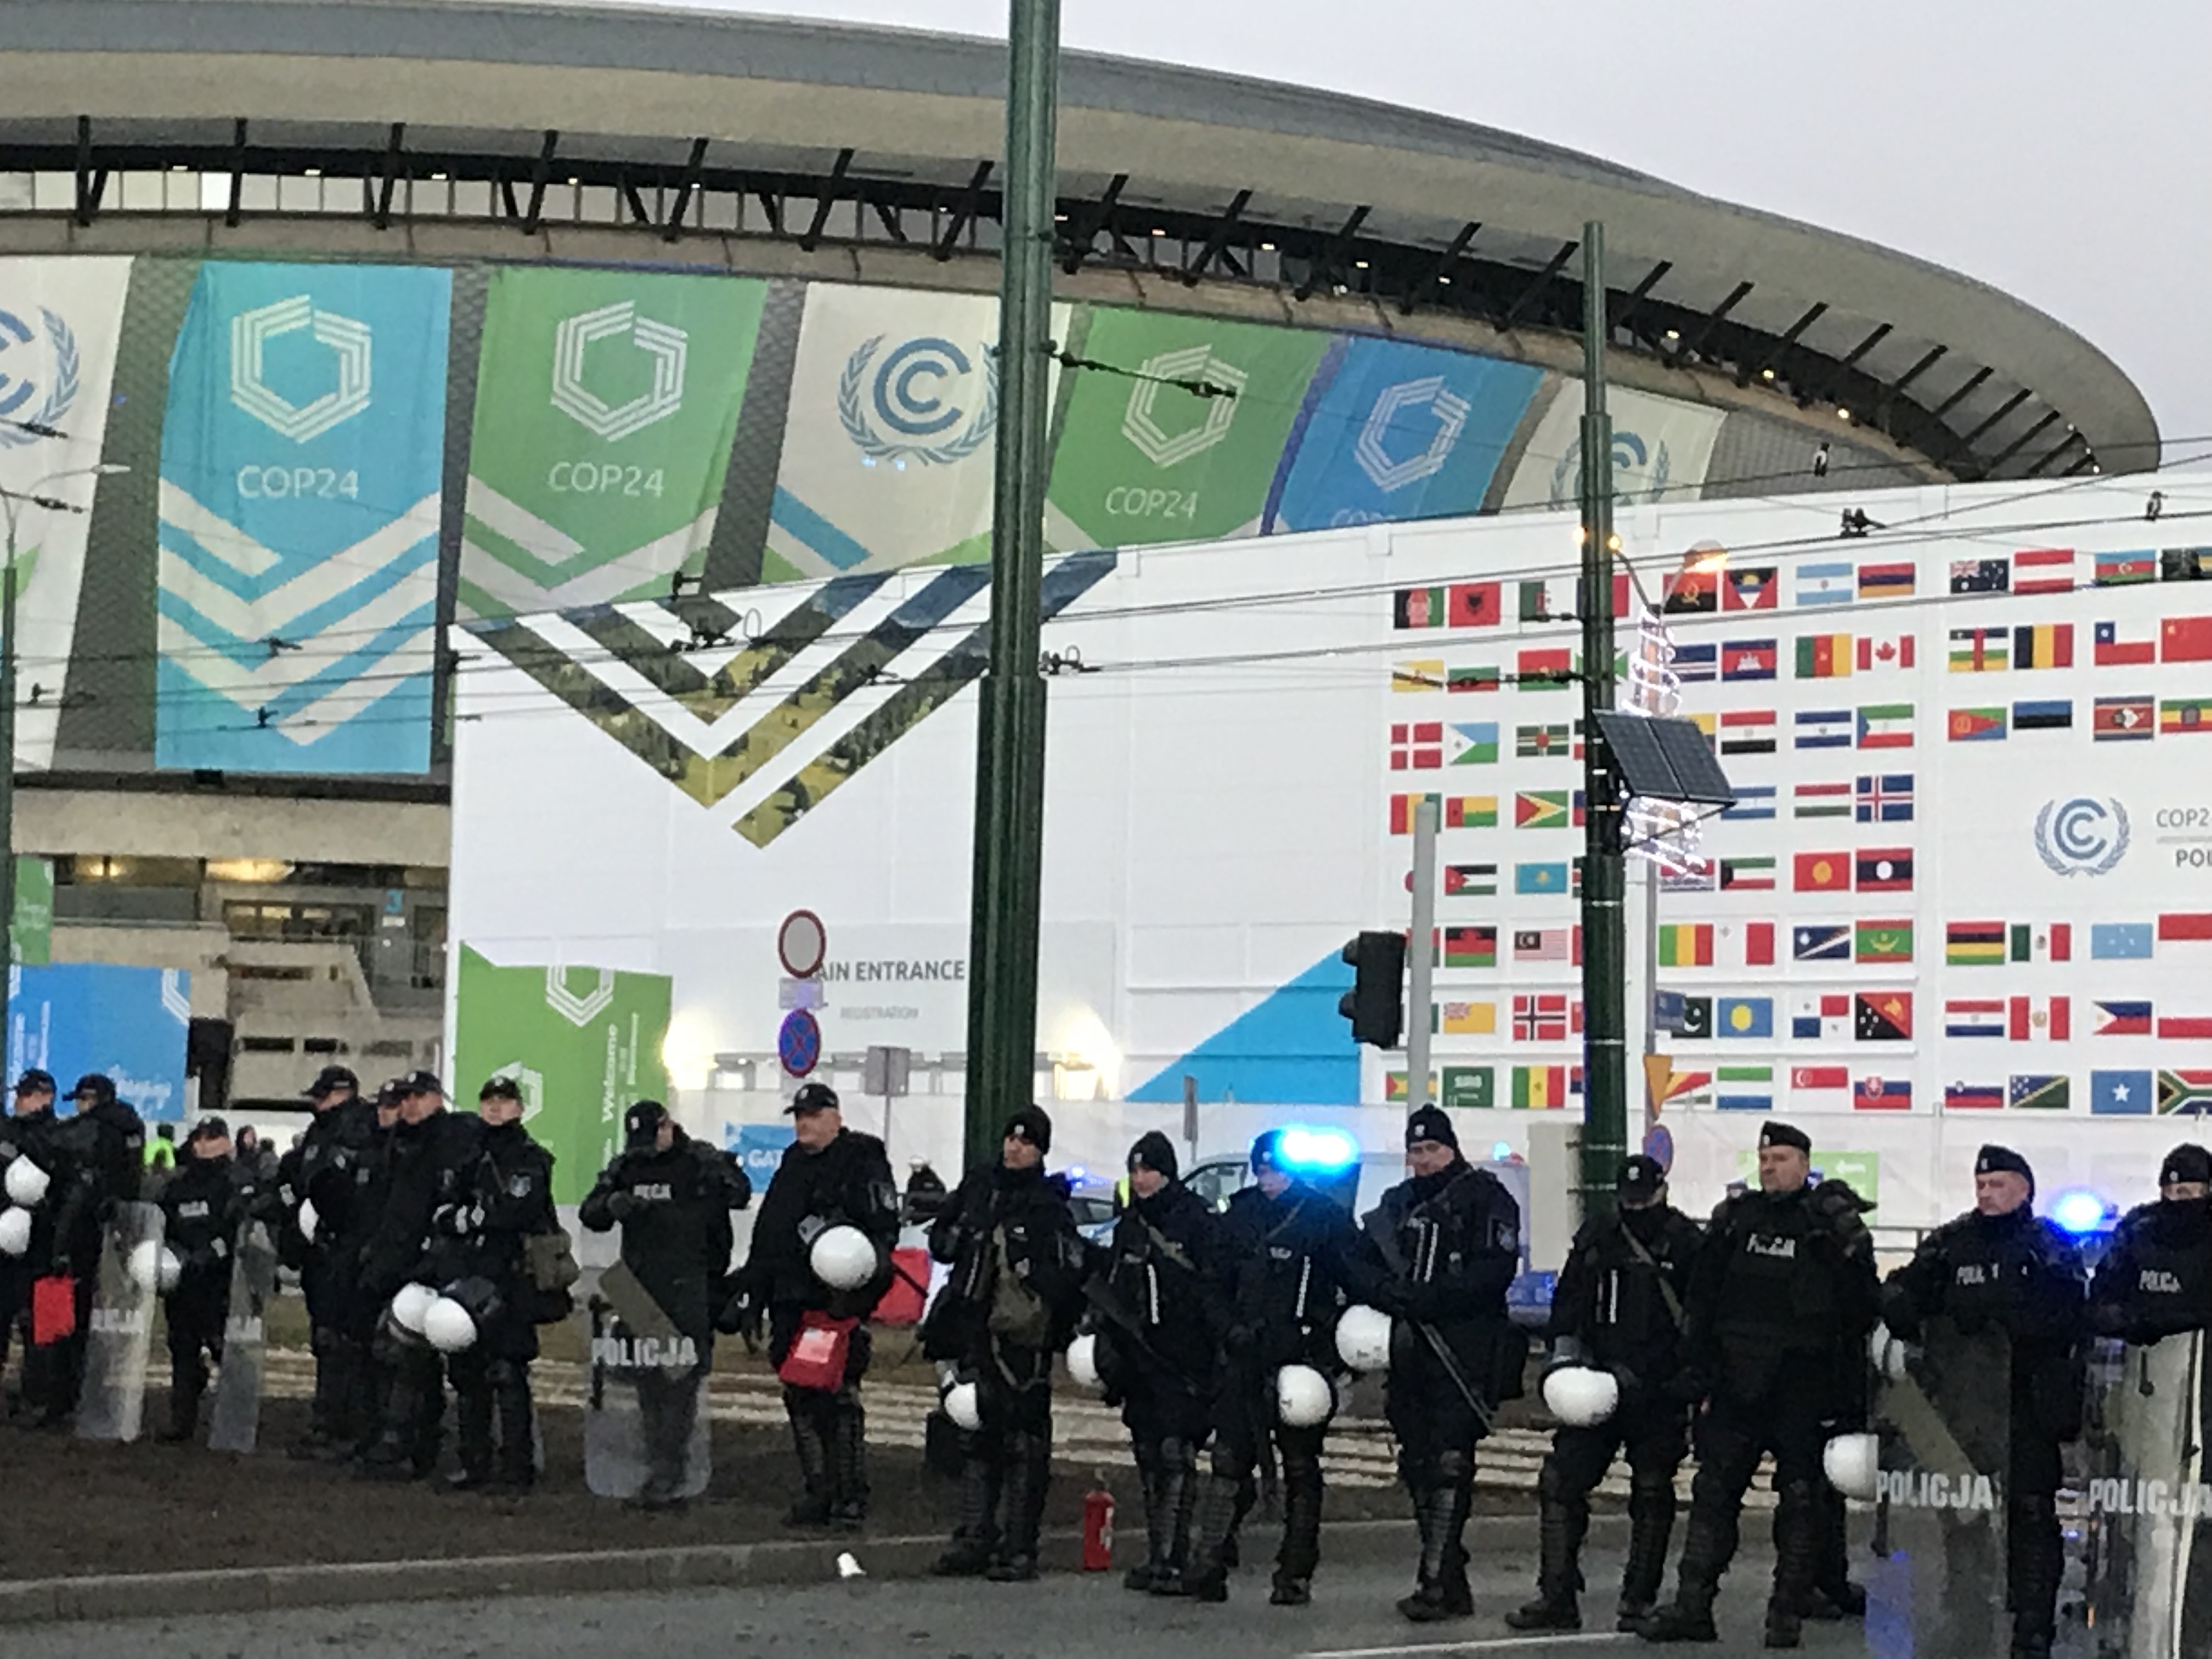 COP24: Climate Protesters March On As Negotiations Intensify